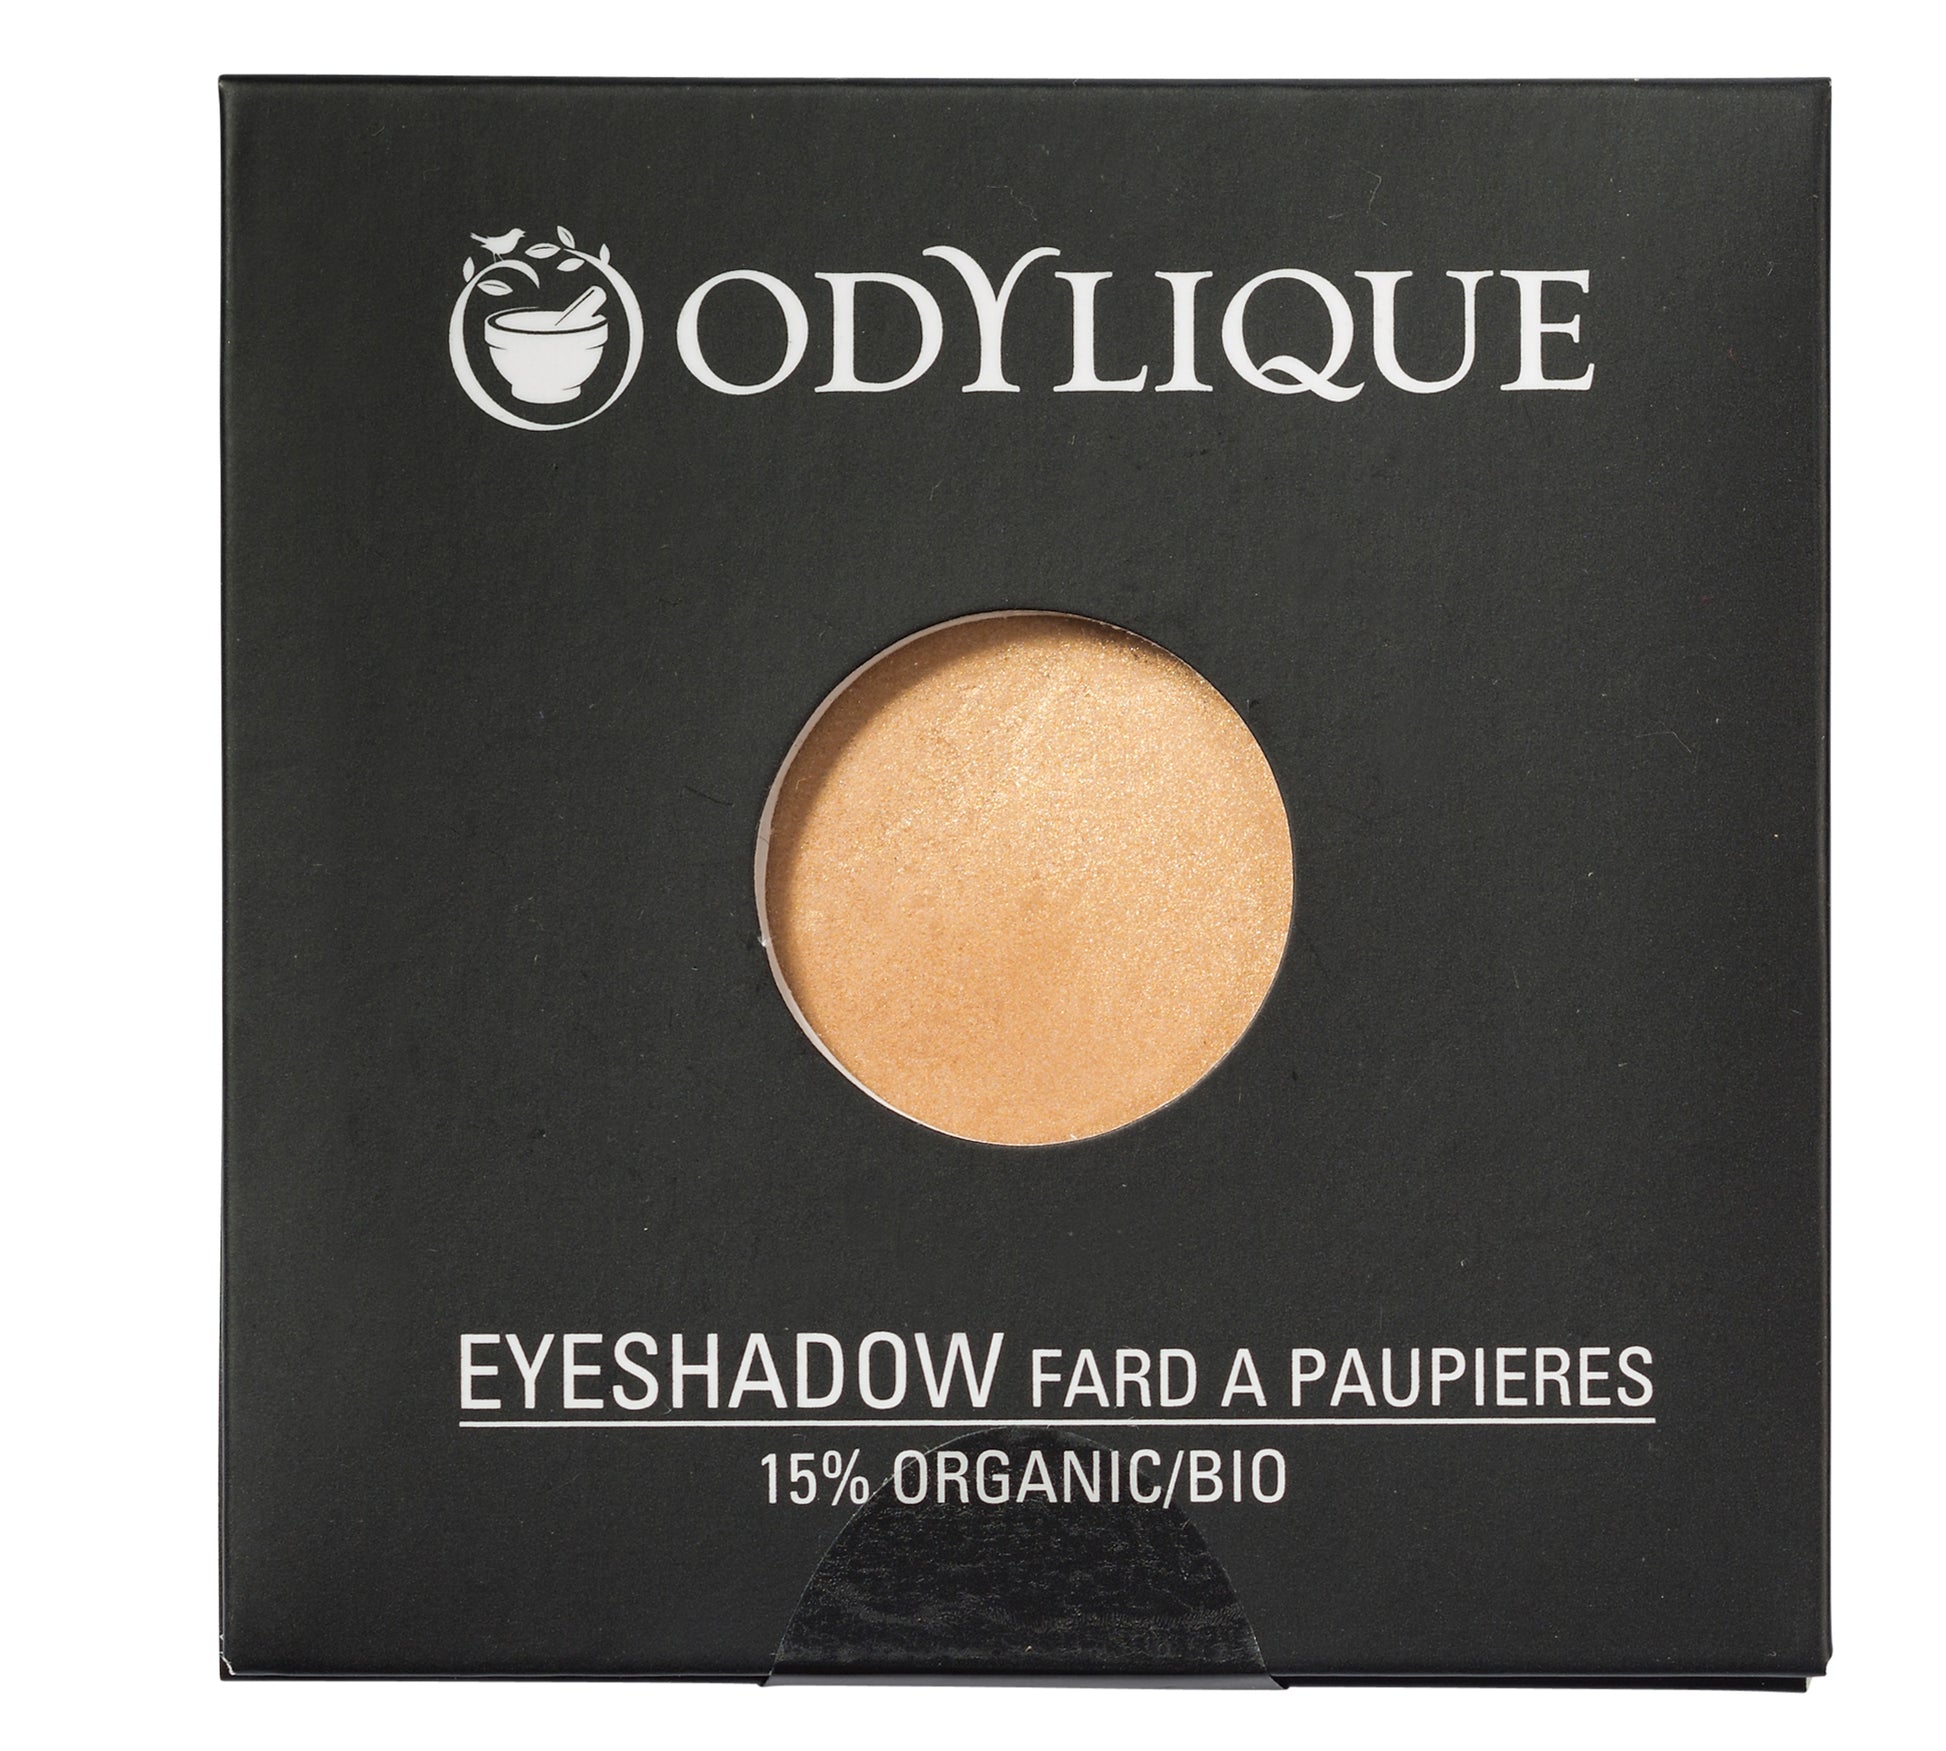 Single pan Odylique organic eyeshadow in shade Gold, placed in its black packaging.